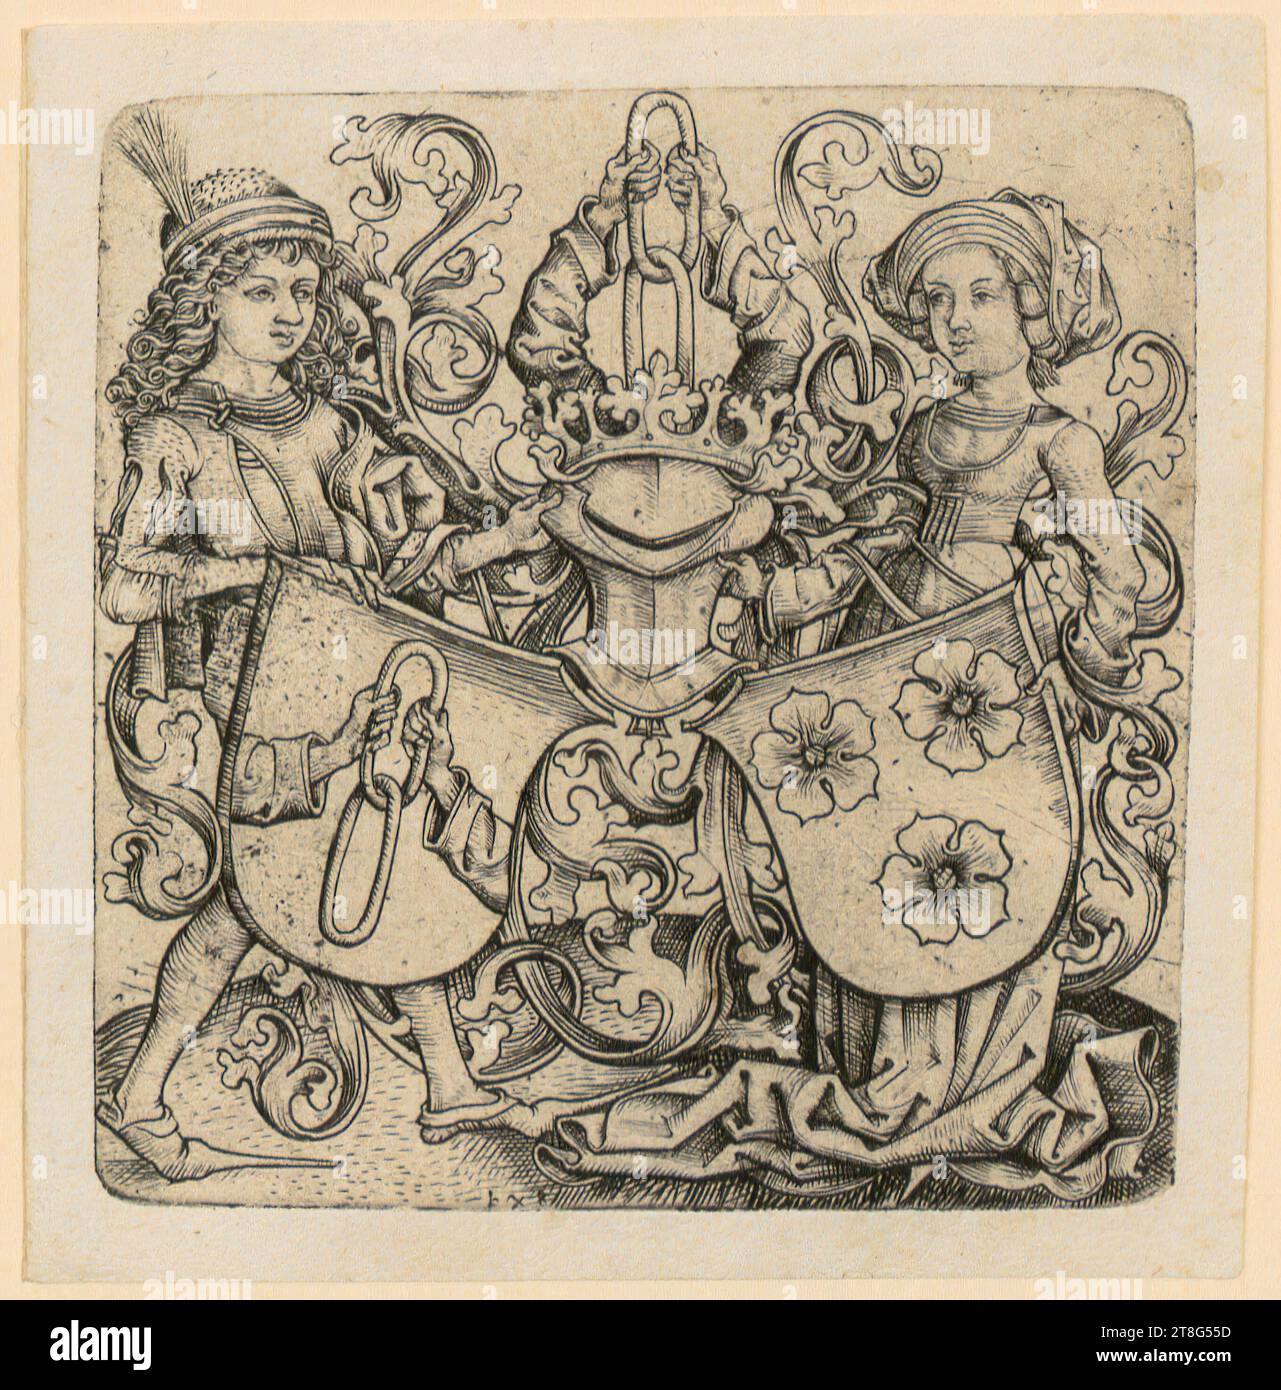 Monogramist BXG (15th century, 2nd half), coat of arms of the families Rohrbach and von Holzhausen, origin of the print carrier: c. 1476 - 1485 ?, copperplate engraving, sheet size: 10.8 x 10.4 cm plate margin: 9.5 x 9.3 cm, bottom center monogrammed 'bxg', verso bottom left dealer's note with graphite '23288, RZ Stock Photo